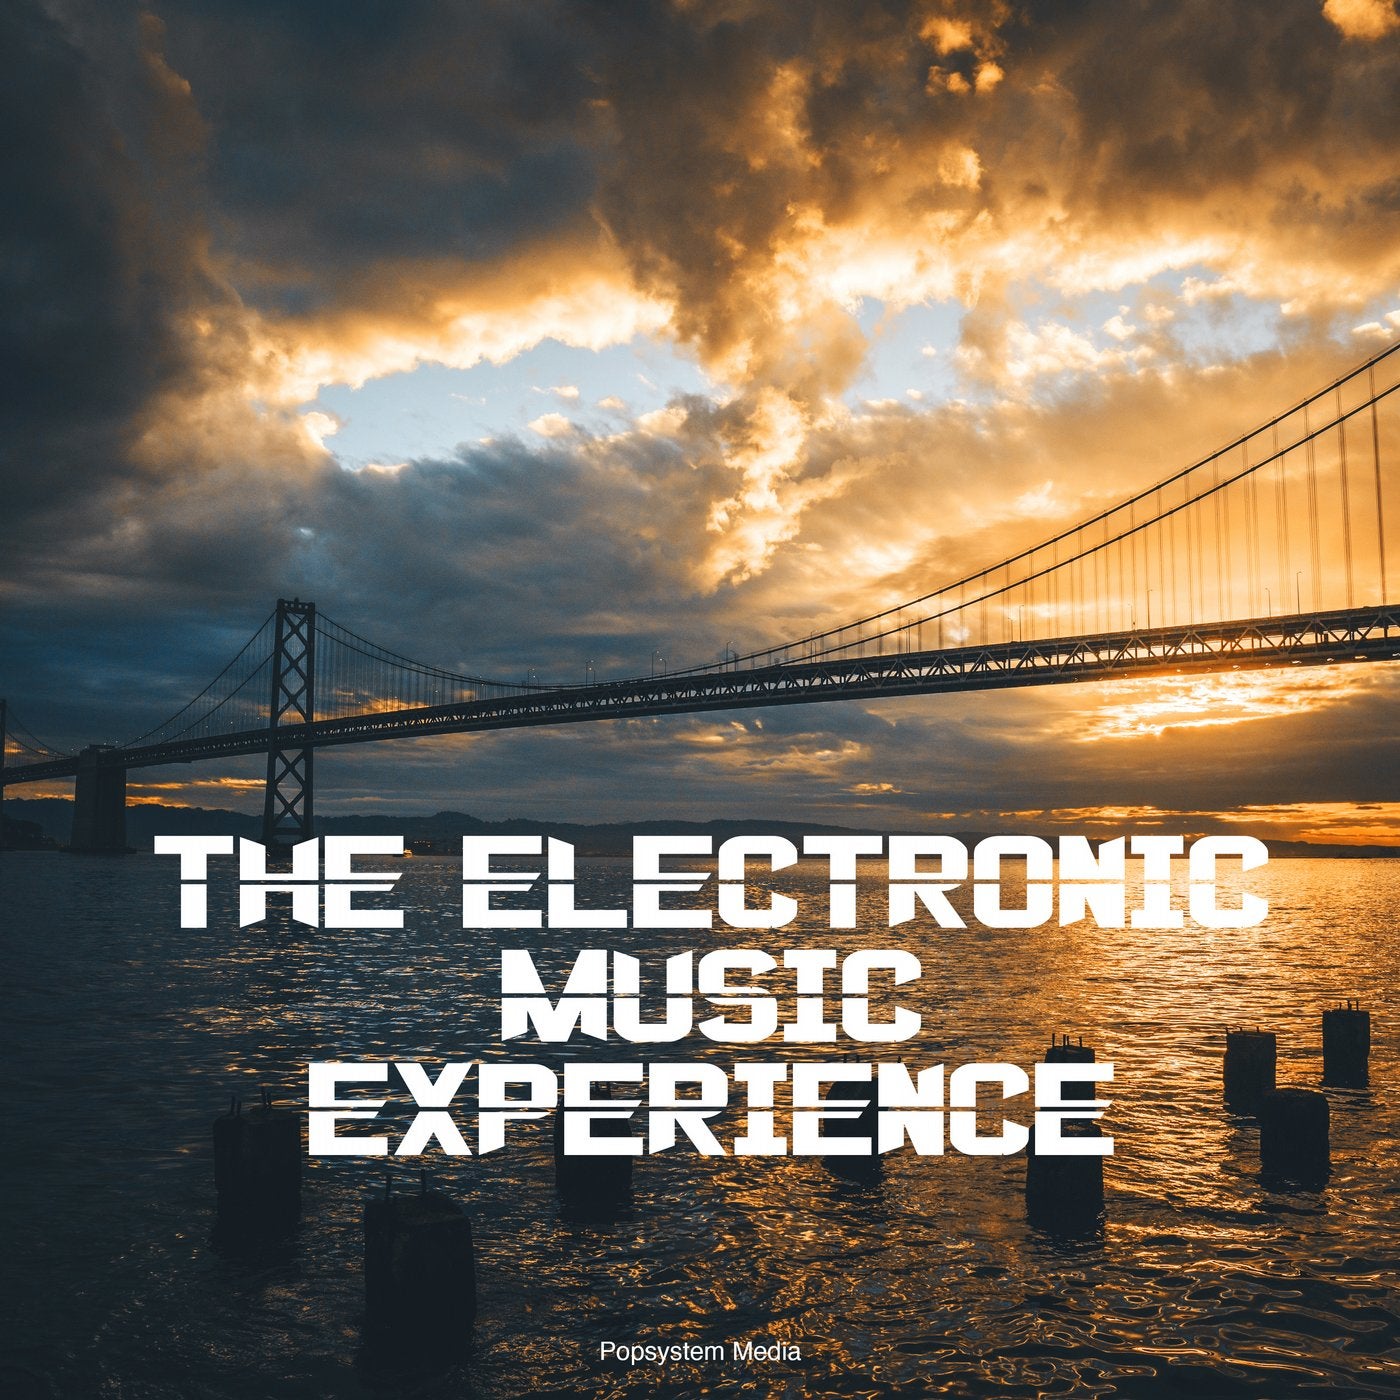 The Electronic Music Experience